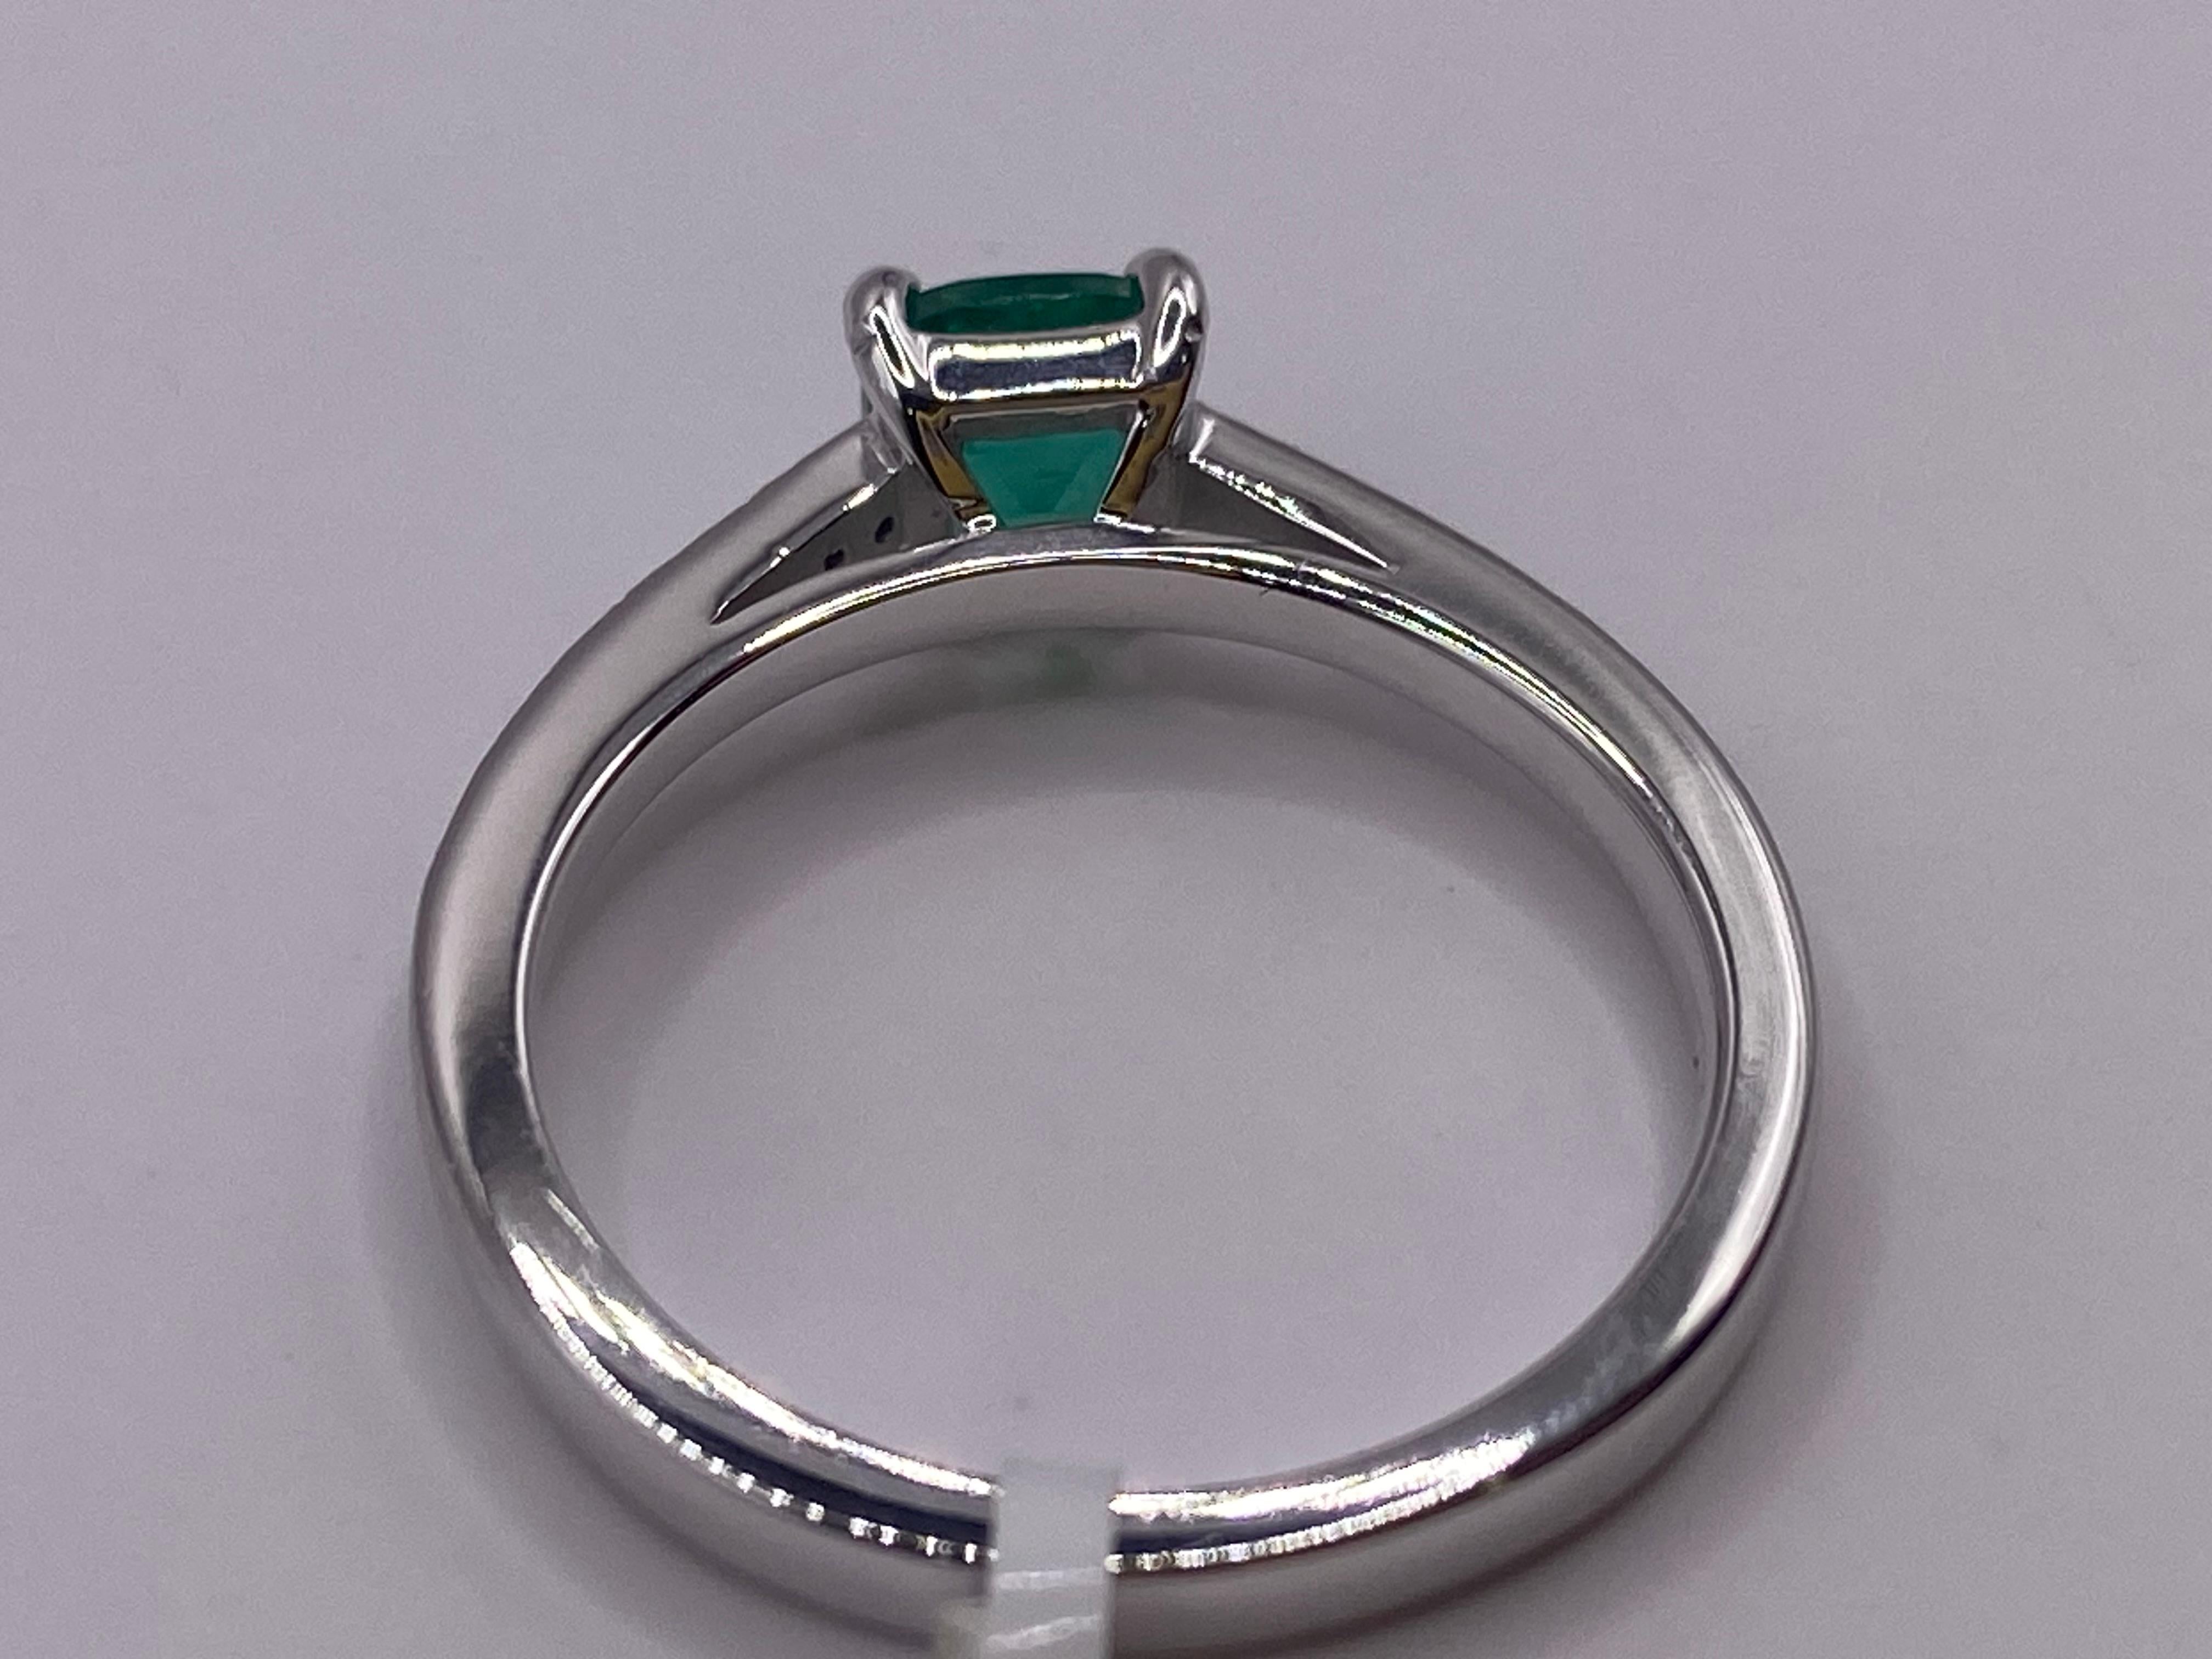 Metal: 14KT White Gold
Finger Size: 6.5
(Ring is size 6.5, but is sizable upon request)

Number of Cushion Cut Emeralds: 1
Carat Weight: 0.58ctw
Stone Size: 5.25 x 5.25mm
Prong Set

Number of Diamonds: 18
Carat Weight: 0.07ctw
Pave Set